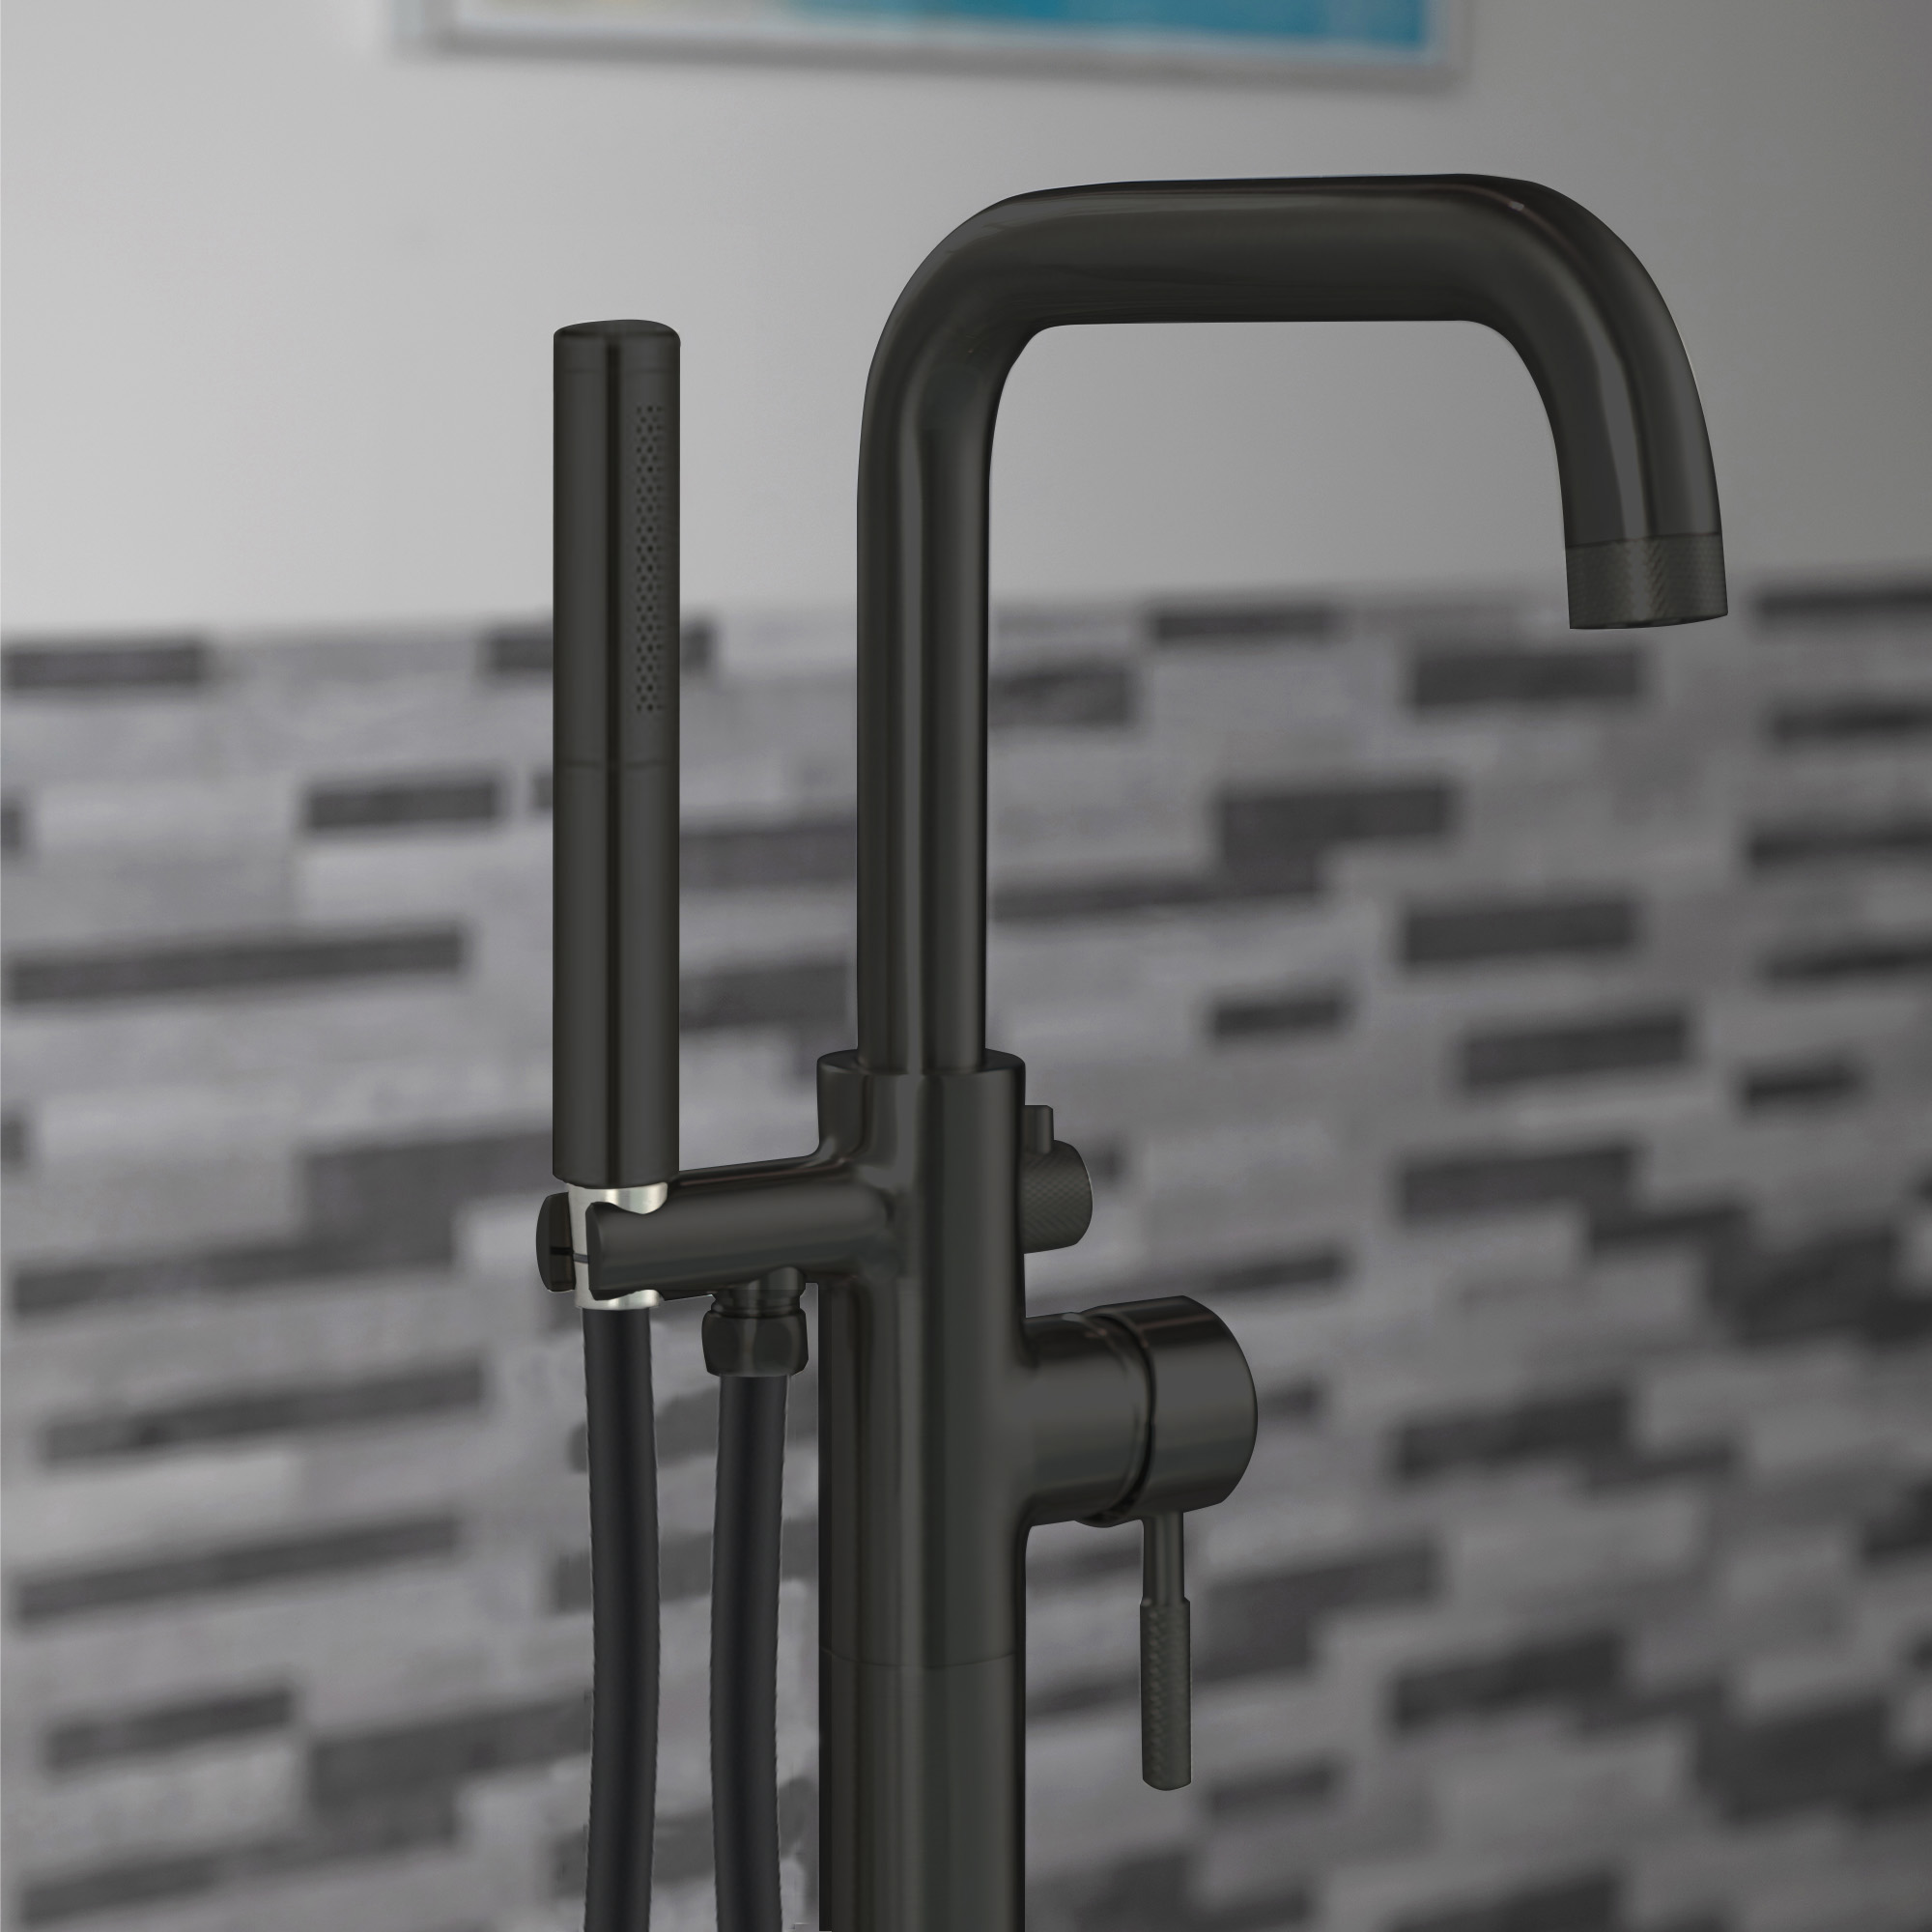  WOODBRIDGE F0072MBDR Contemporary Single Handle Floor Mount Freestanding Tub Filler Faucet with 2 Function Cylinder Style Hand Shower in Matte Black Finish._15148